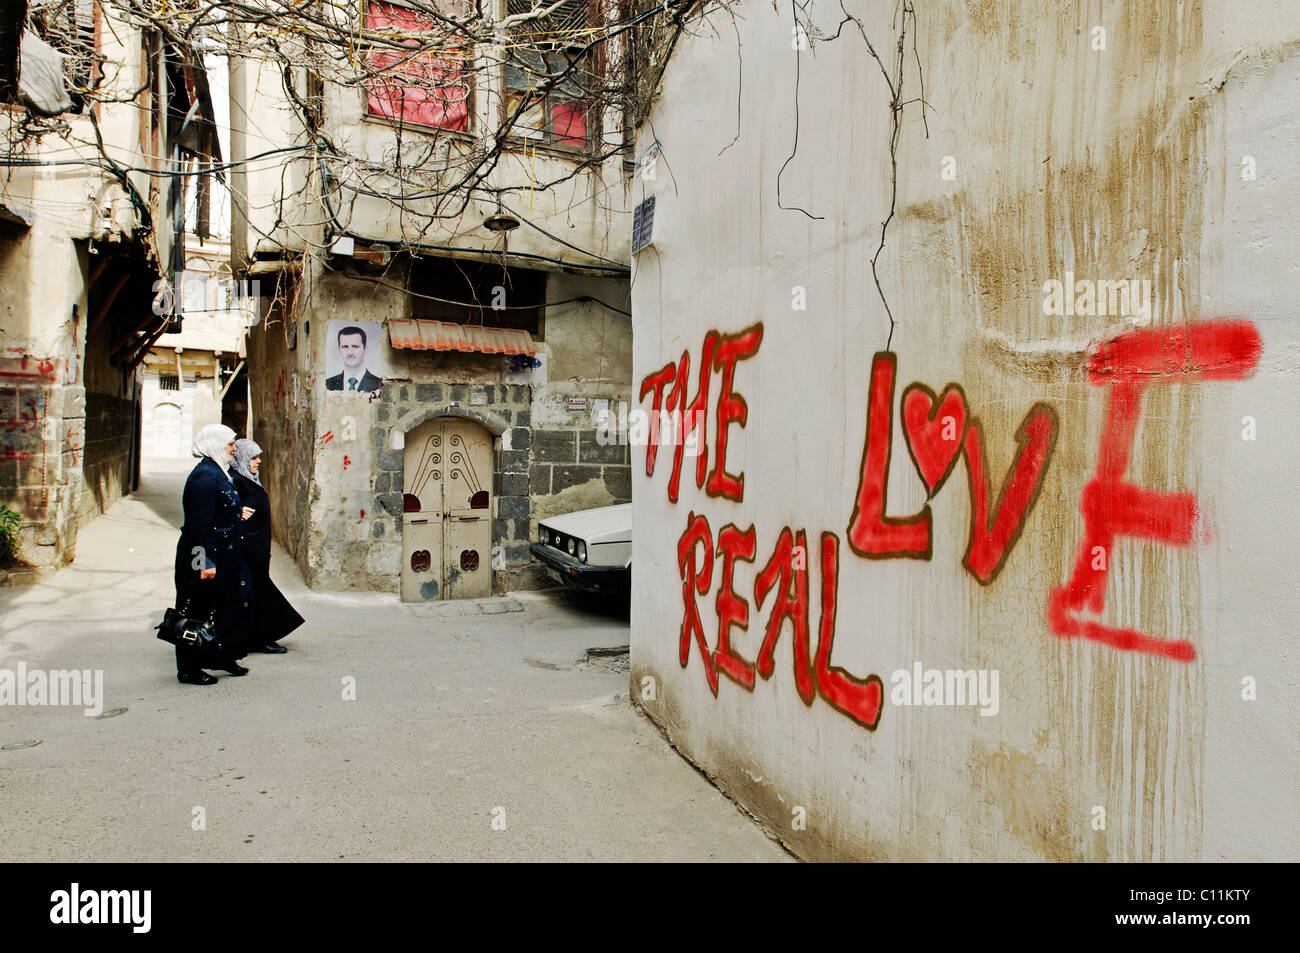 Women with headscarves and graffiti, 'Real Love', in the historic centre of Damascus, photo of Bashar Al Assad in the back Stock Photo